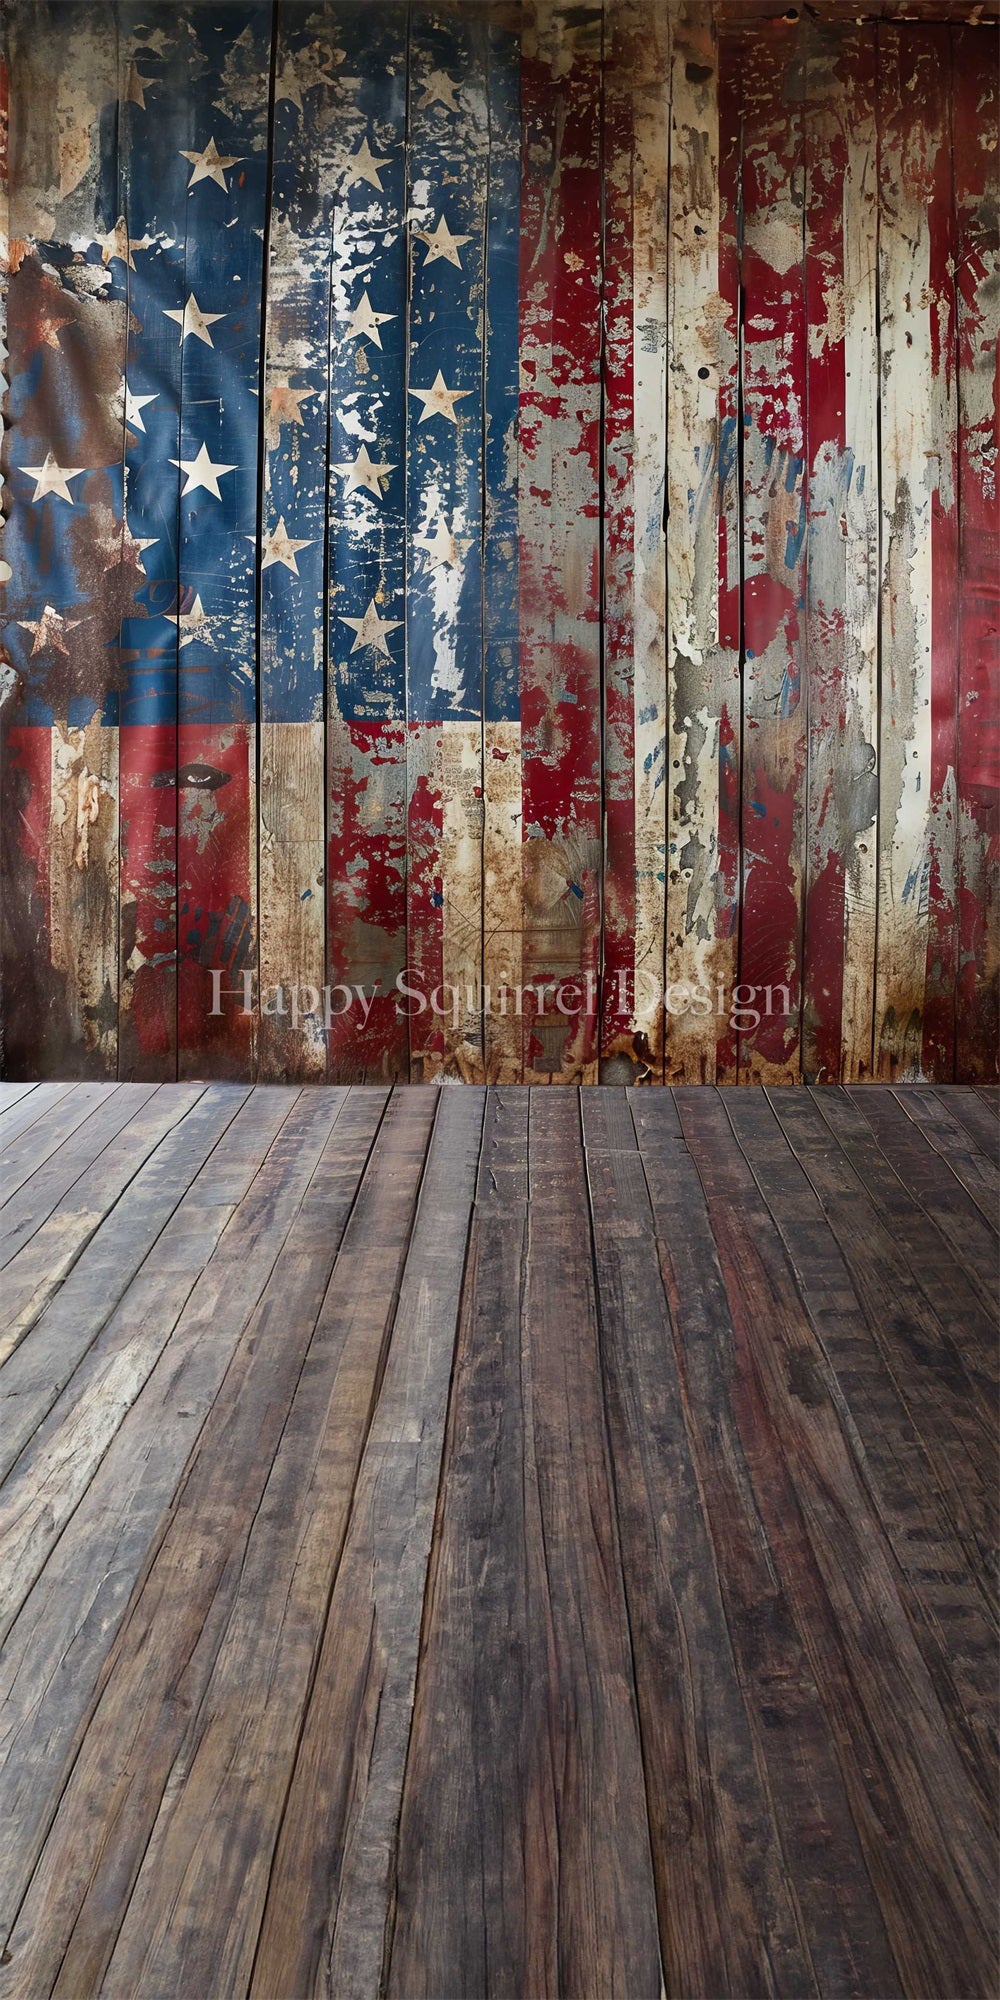 Kate Sweep Independence Day Retro Rustic Graffiti Flag Broken Wooden Wall Backdrop Designed by Happy Squirrel Design